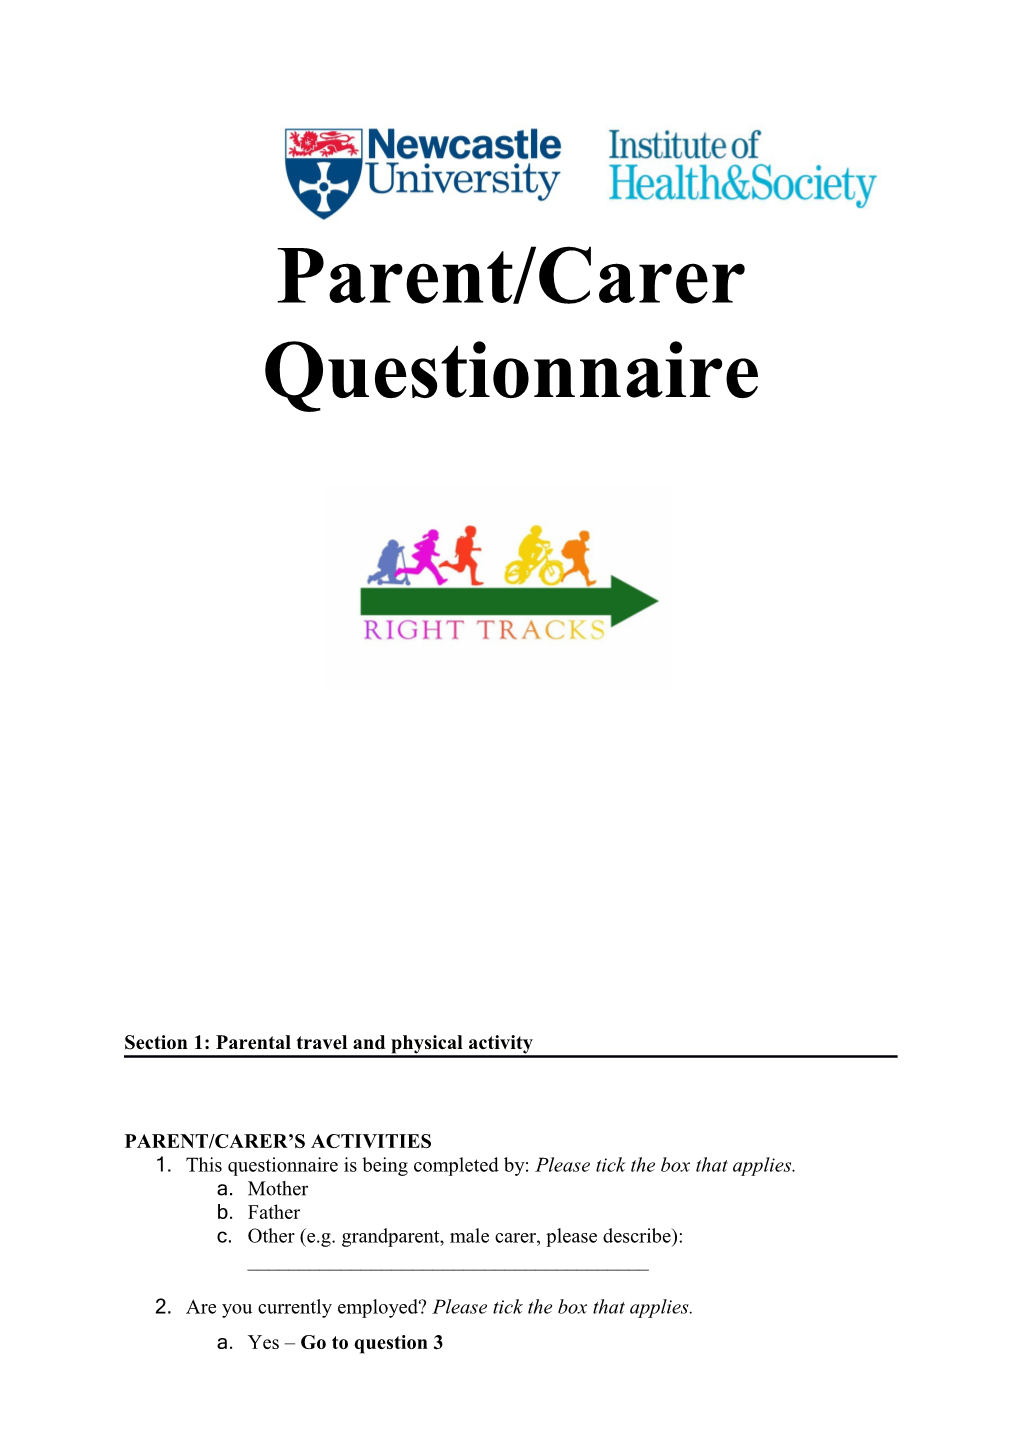 Section 1: Parental Travel and Physical Activity